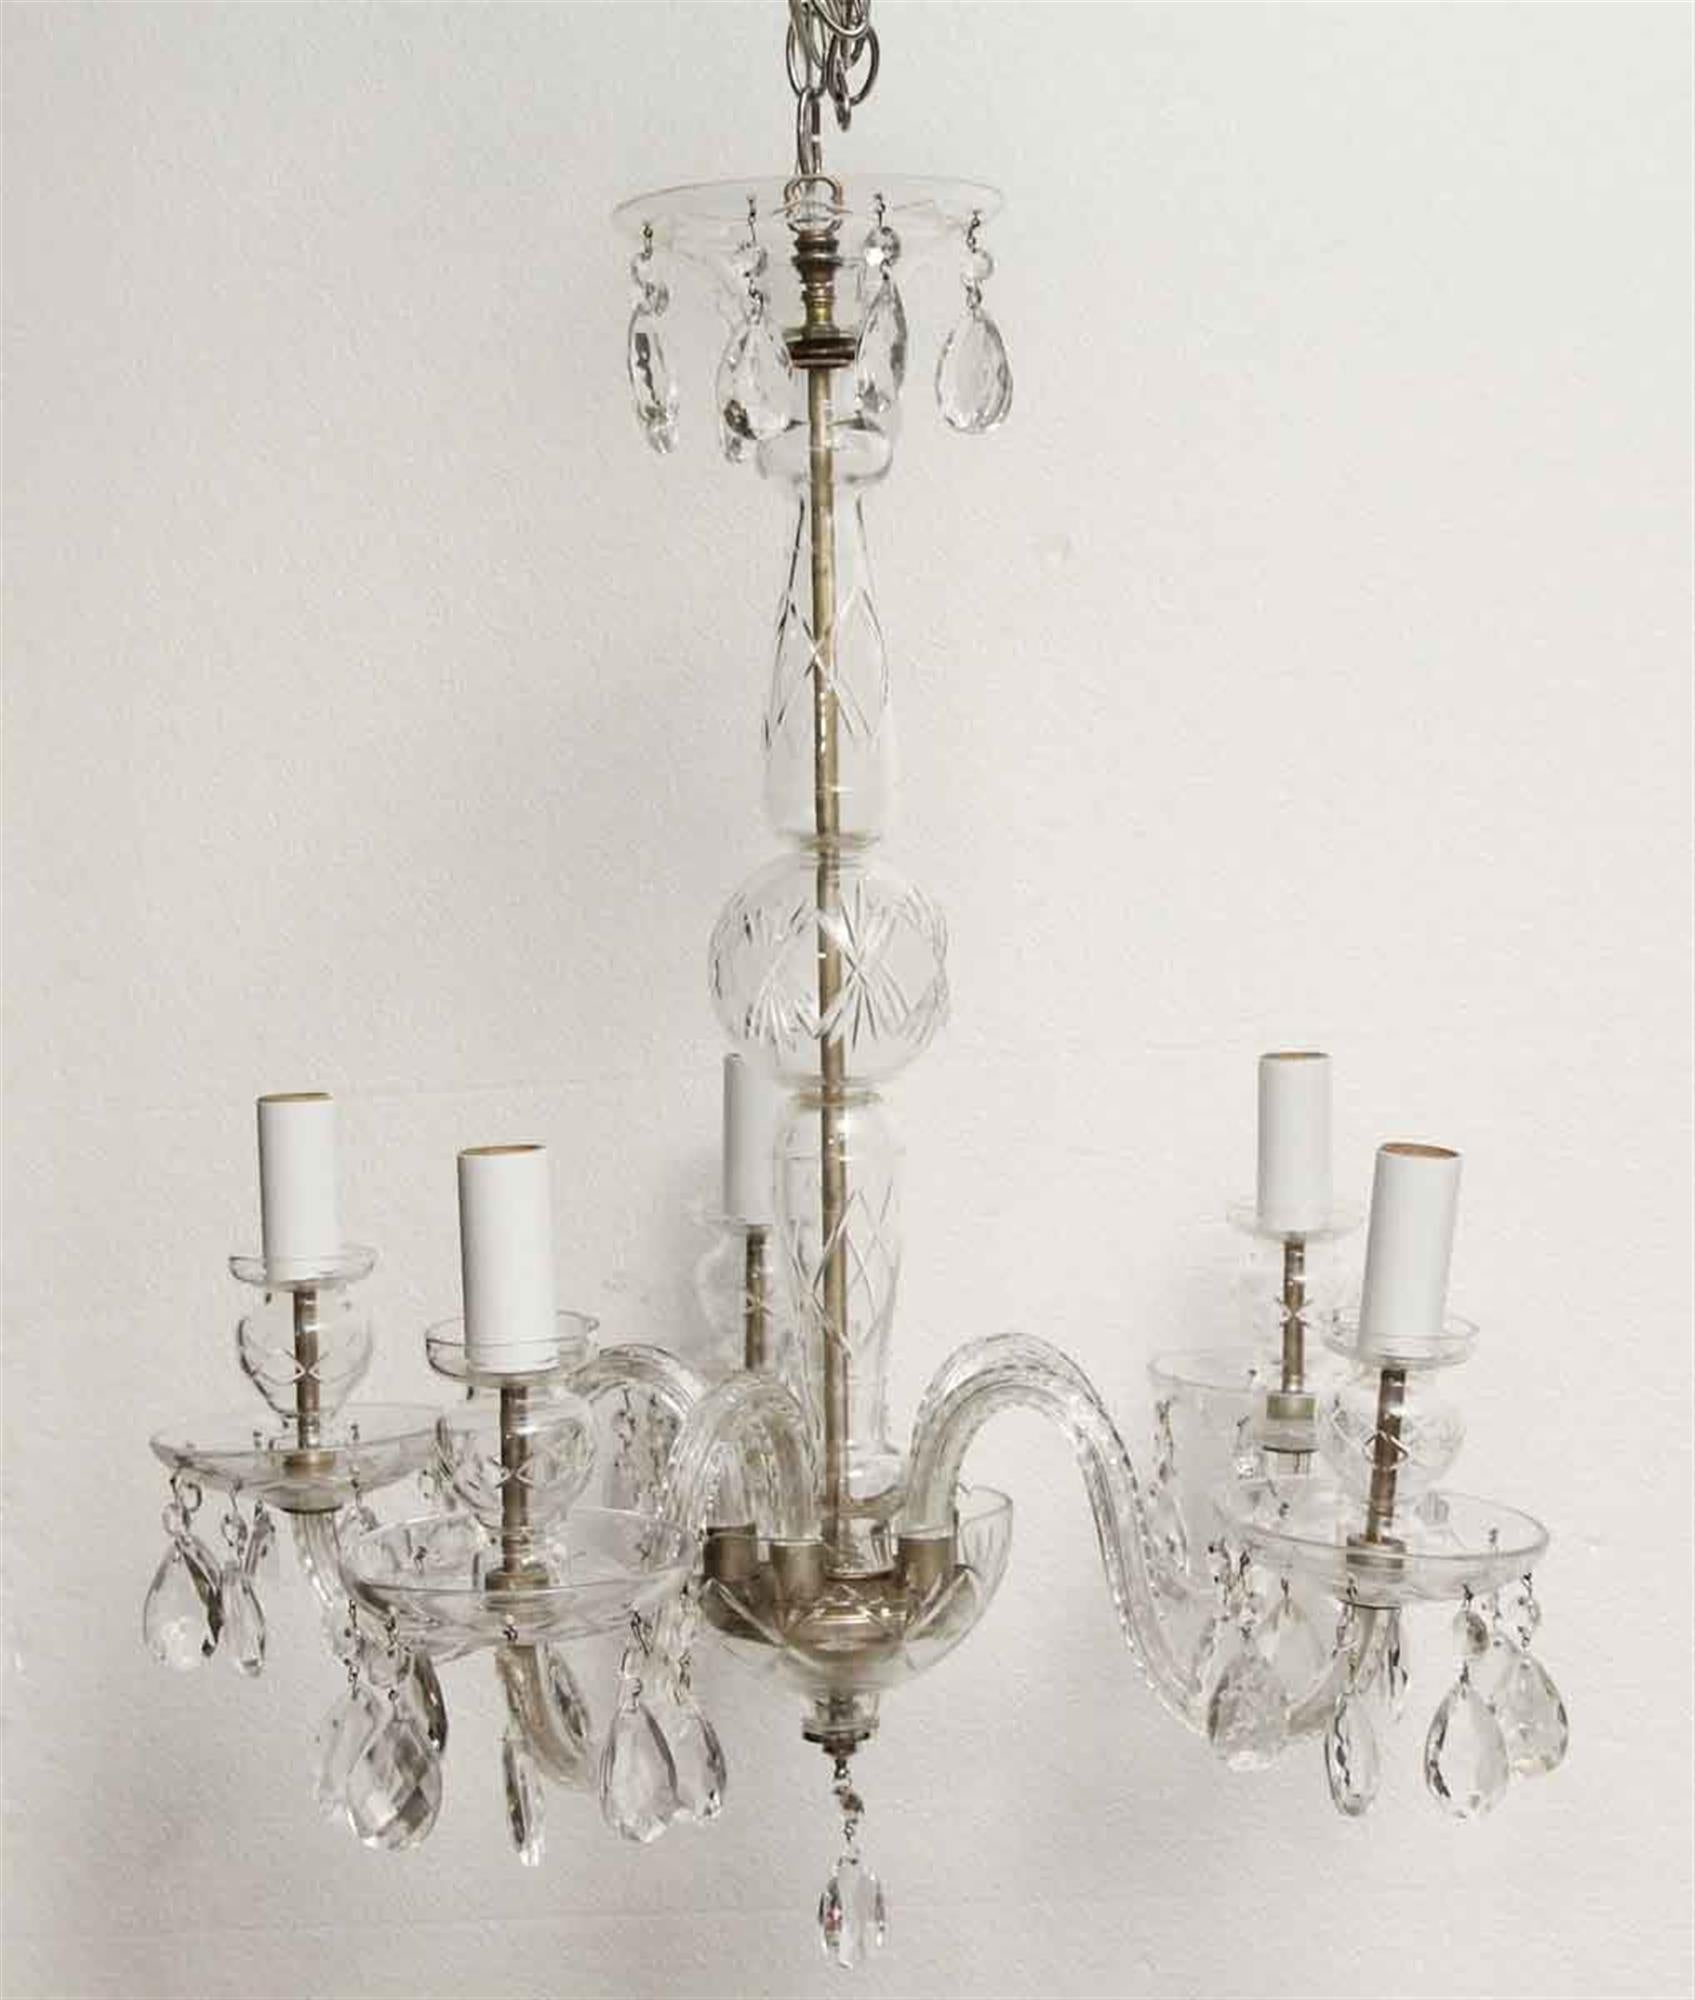 1960s crystal decorative chandelier with five lights. This can be seen at our 1800 South Grand Ave location in Downtown LA.